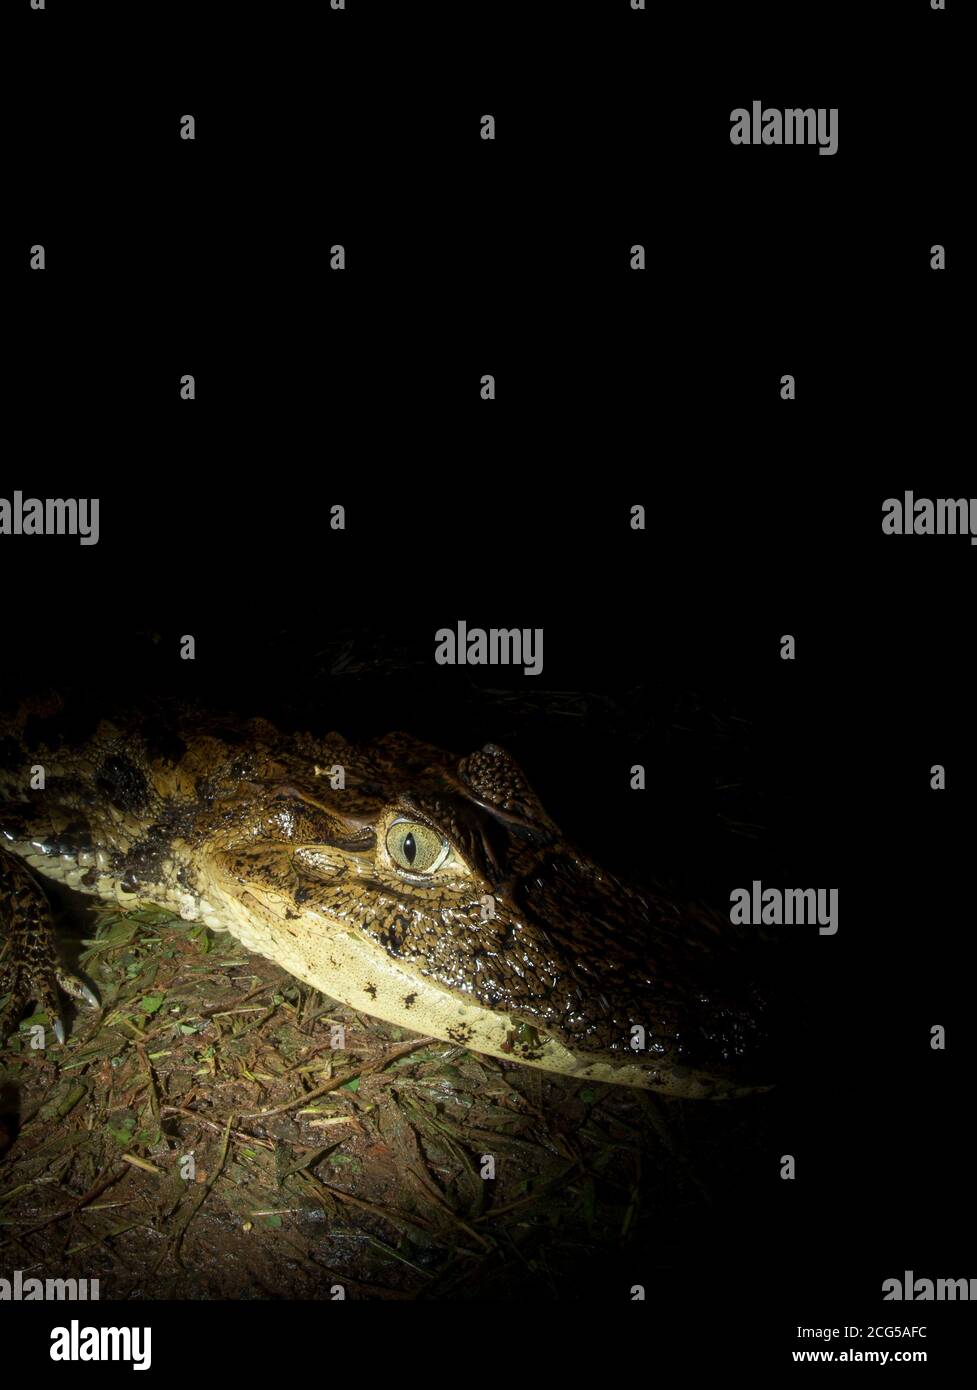 Spectacled caiman on road - Costa Rica Stock Photo